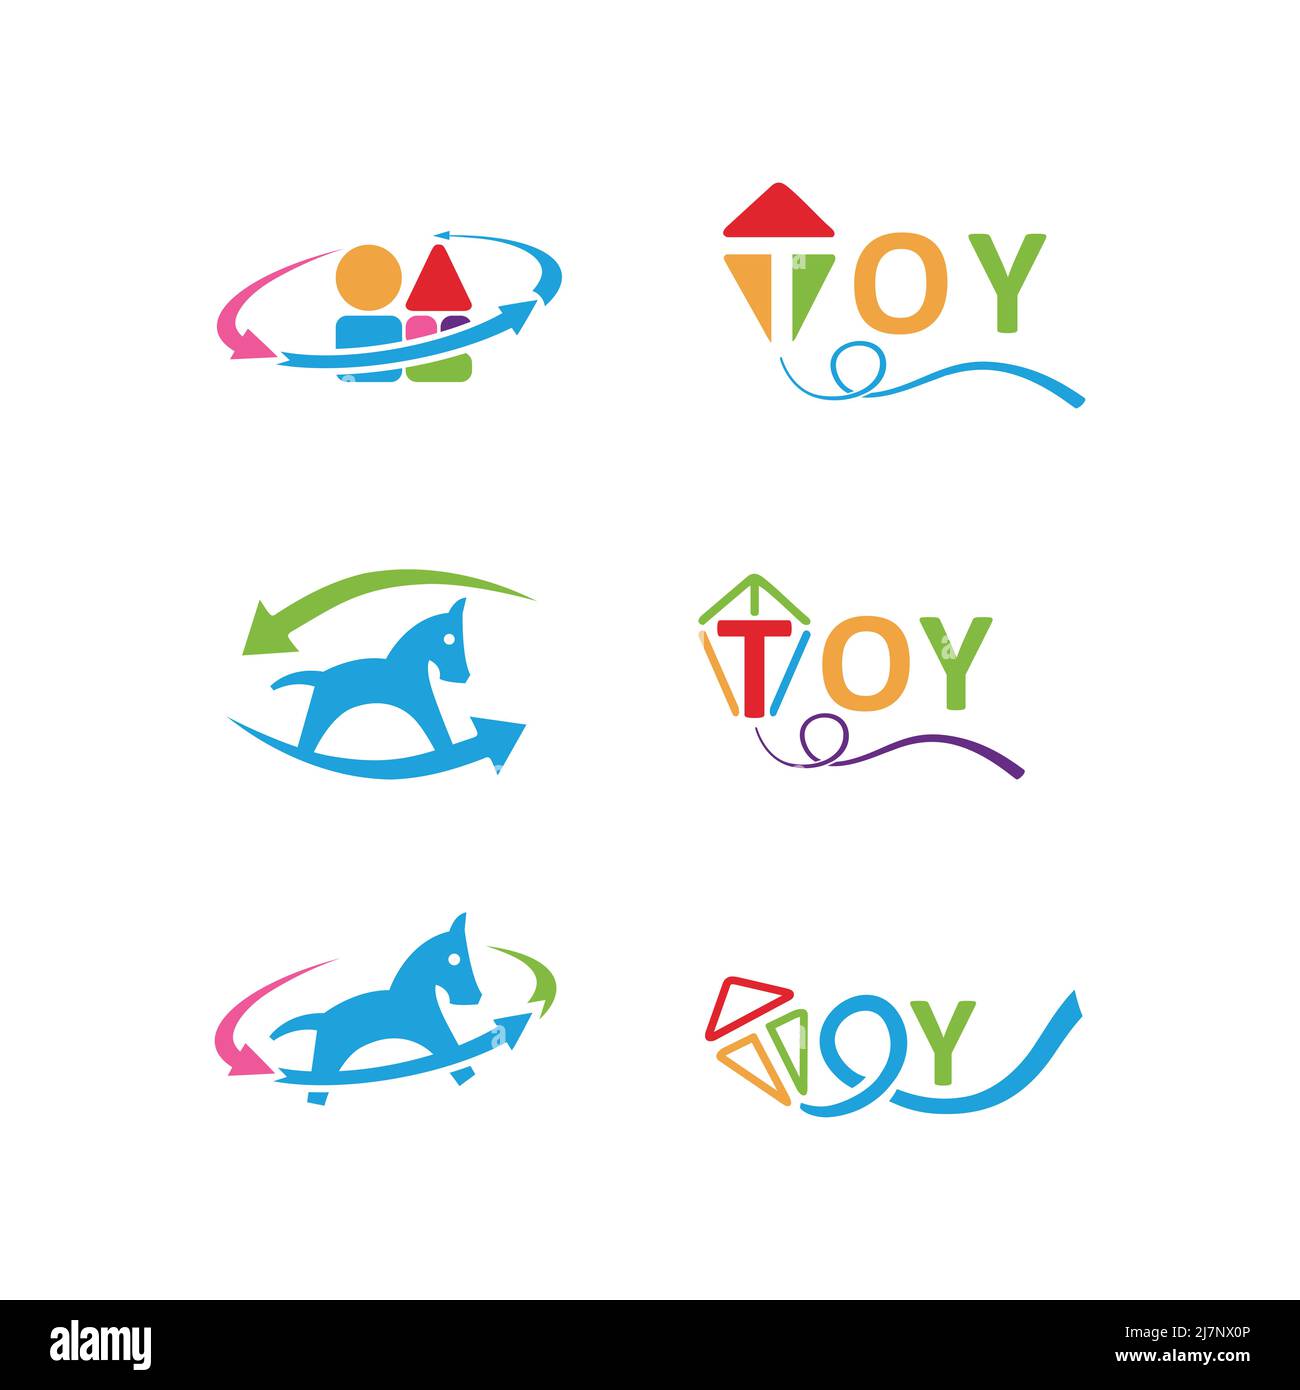 Kid toys color icon set, baby toys symbols collection Stock Photo